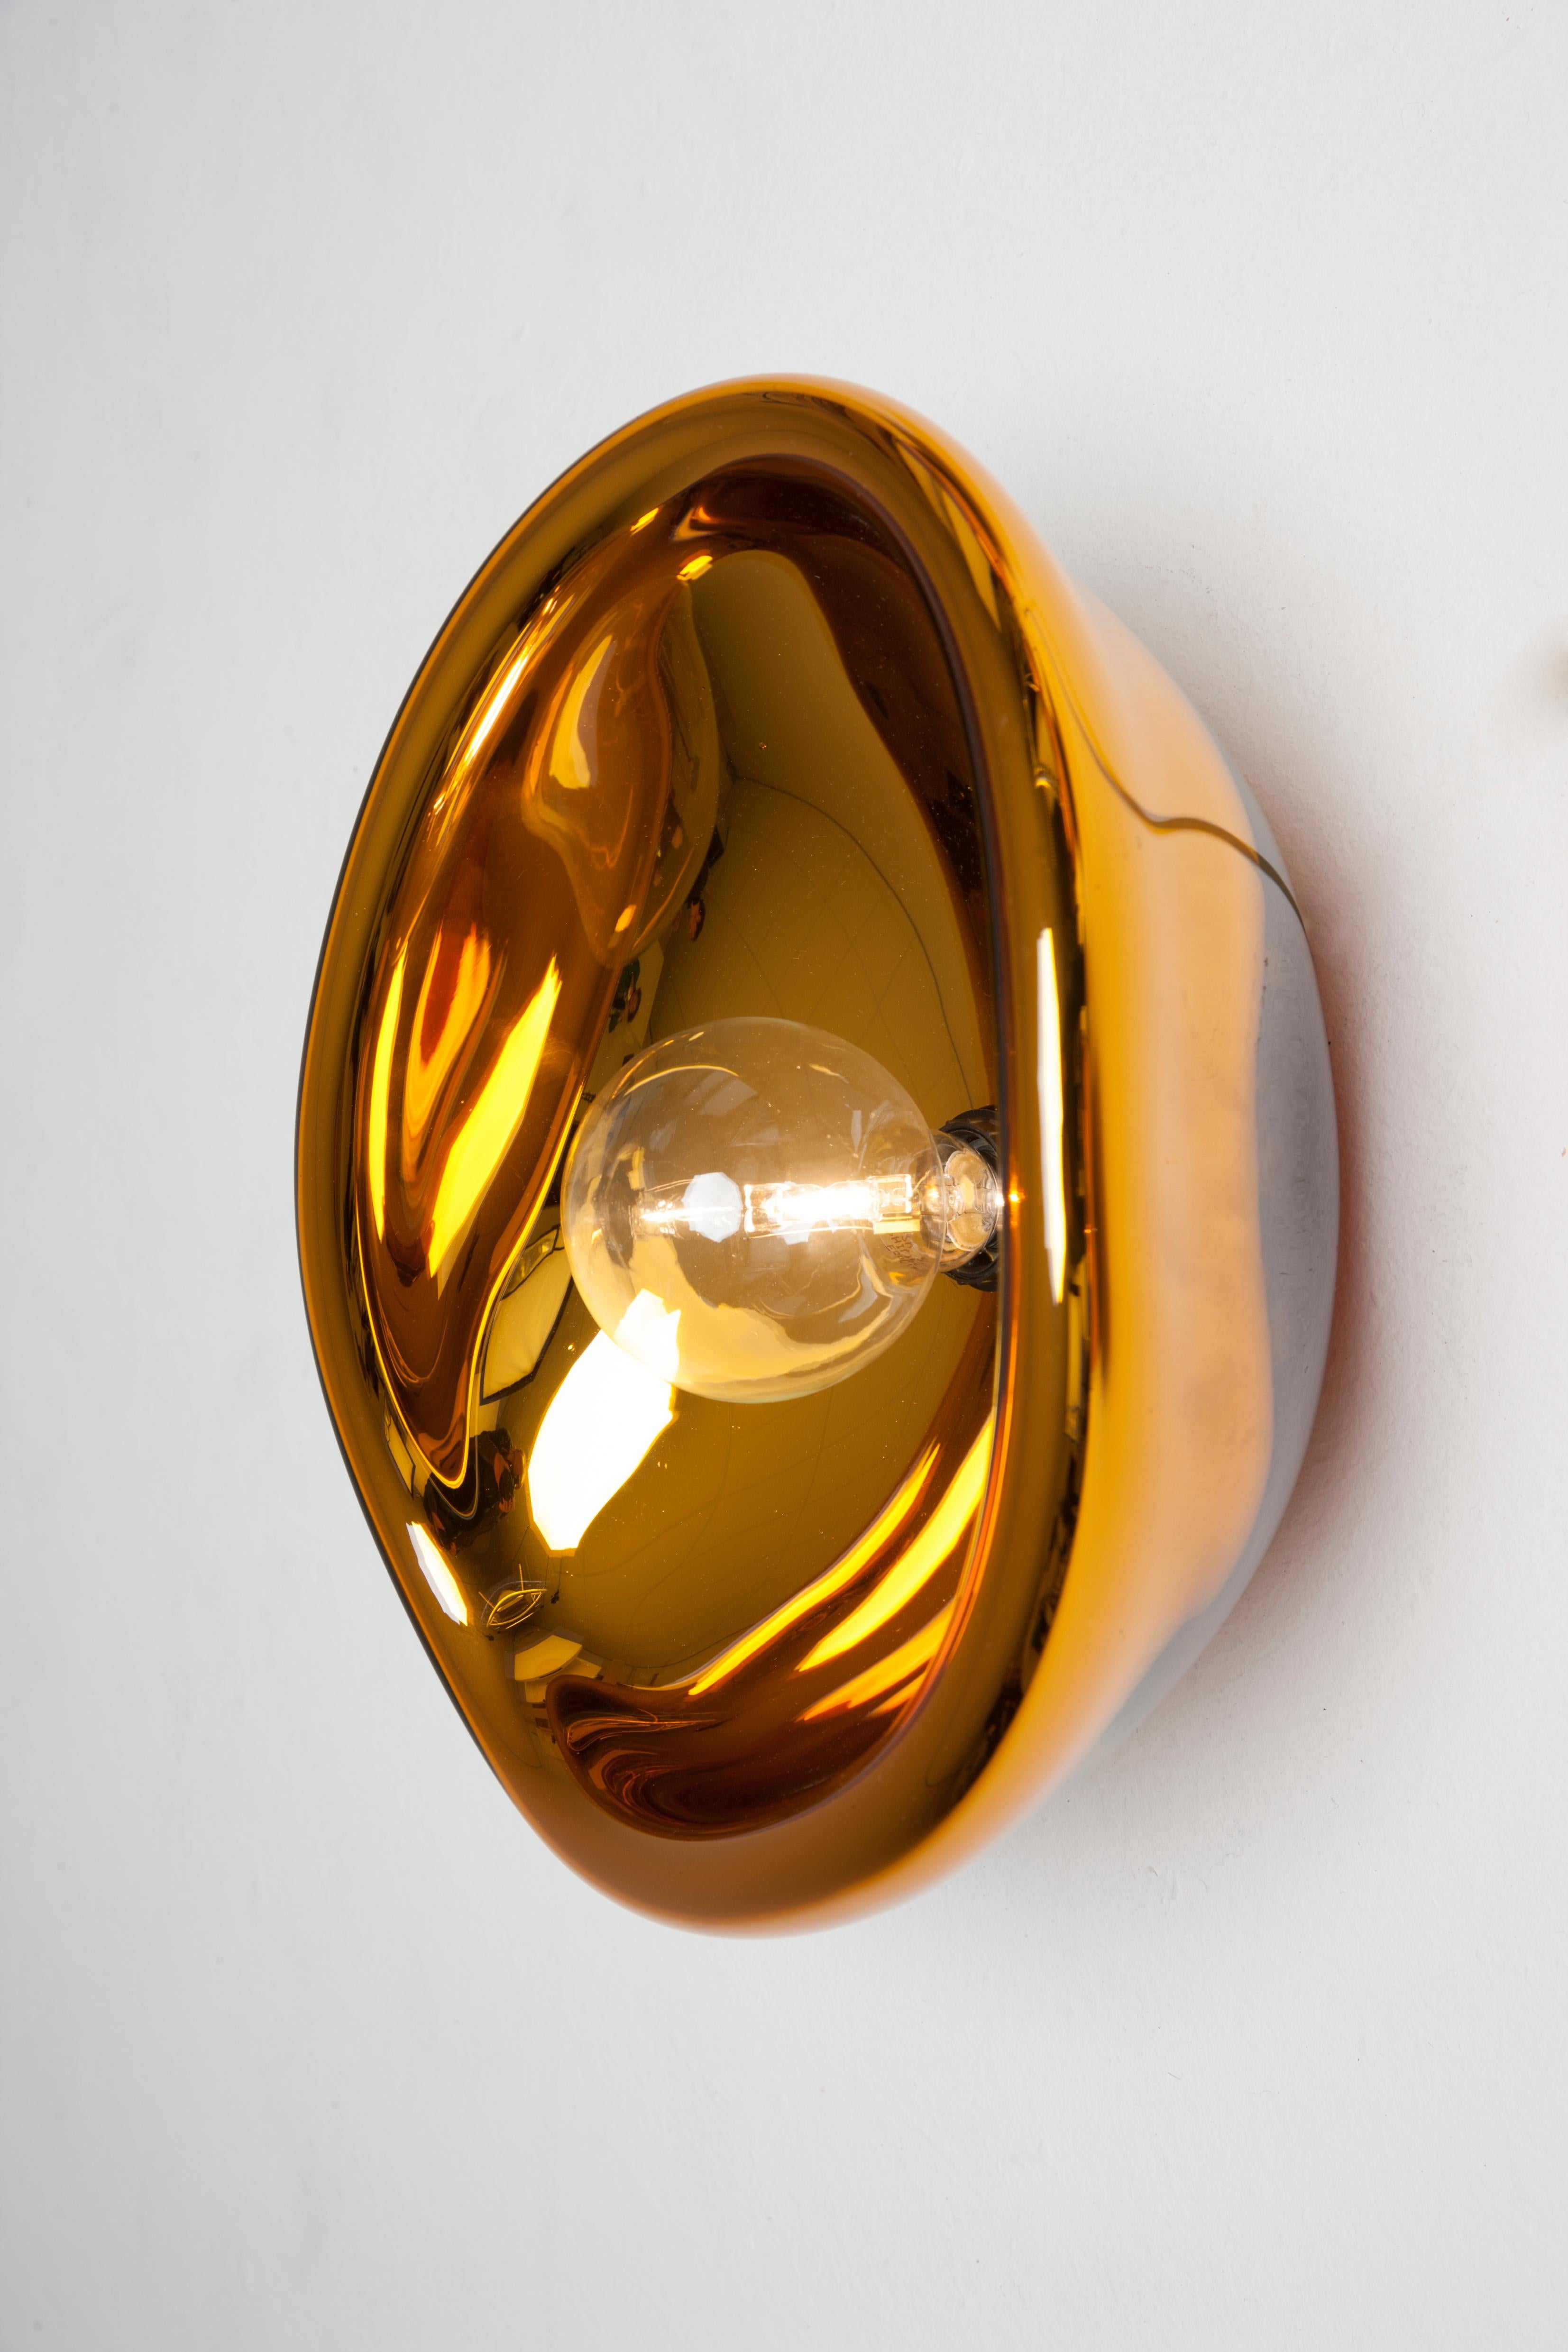 Medium Aurum gold glass sconces, Alex de Witte
Unique
Dimensions: D 25 x H 35 cm
Materials: Mouth blown glass
It can be purchased as an ensemble or individual, in different dimensions and colors.

Aurum shows how Alex de Wite is able to convey